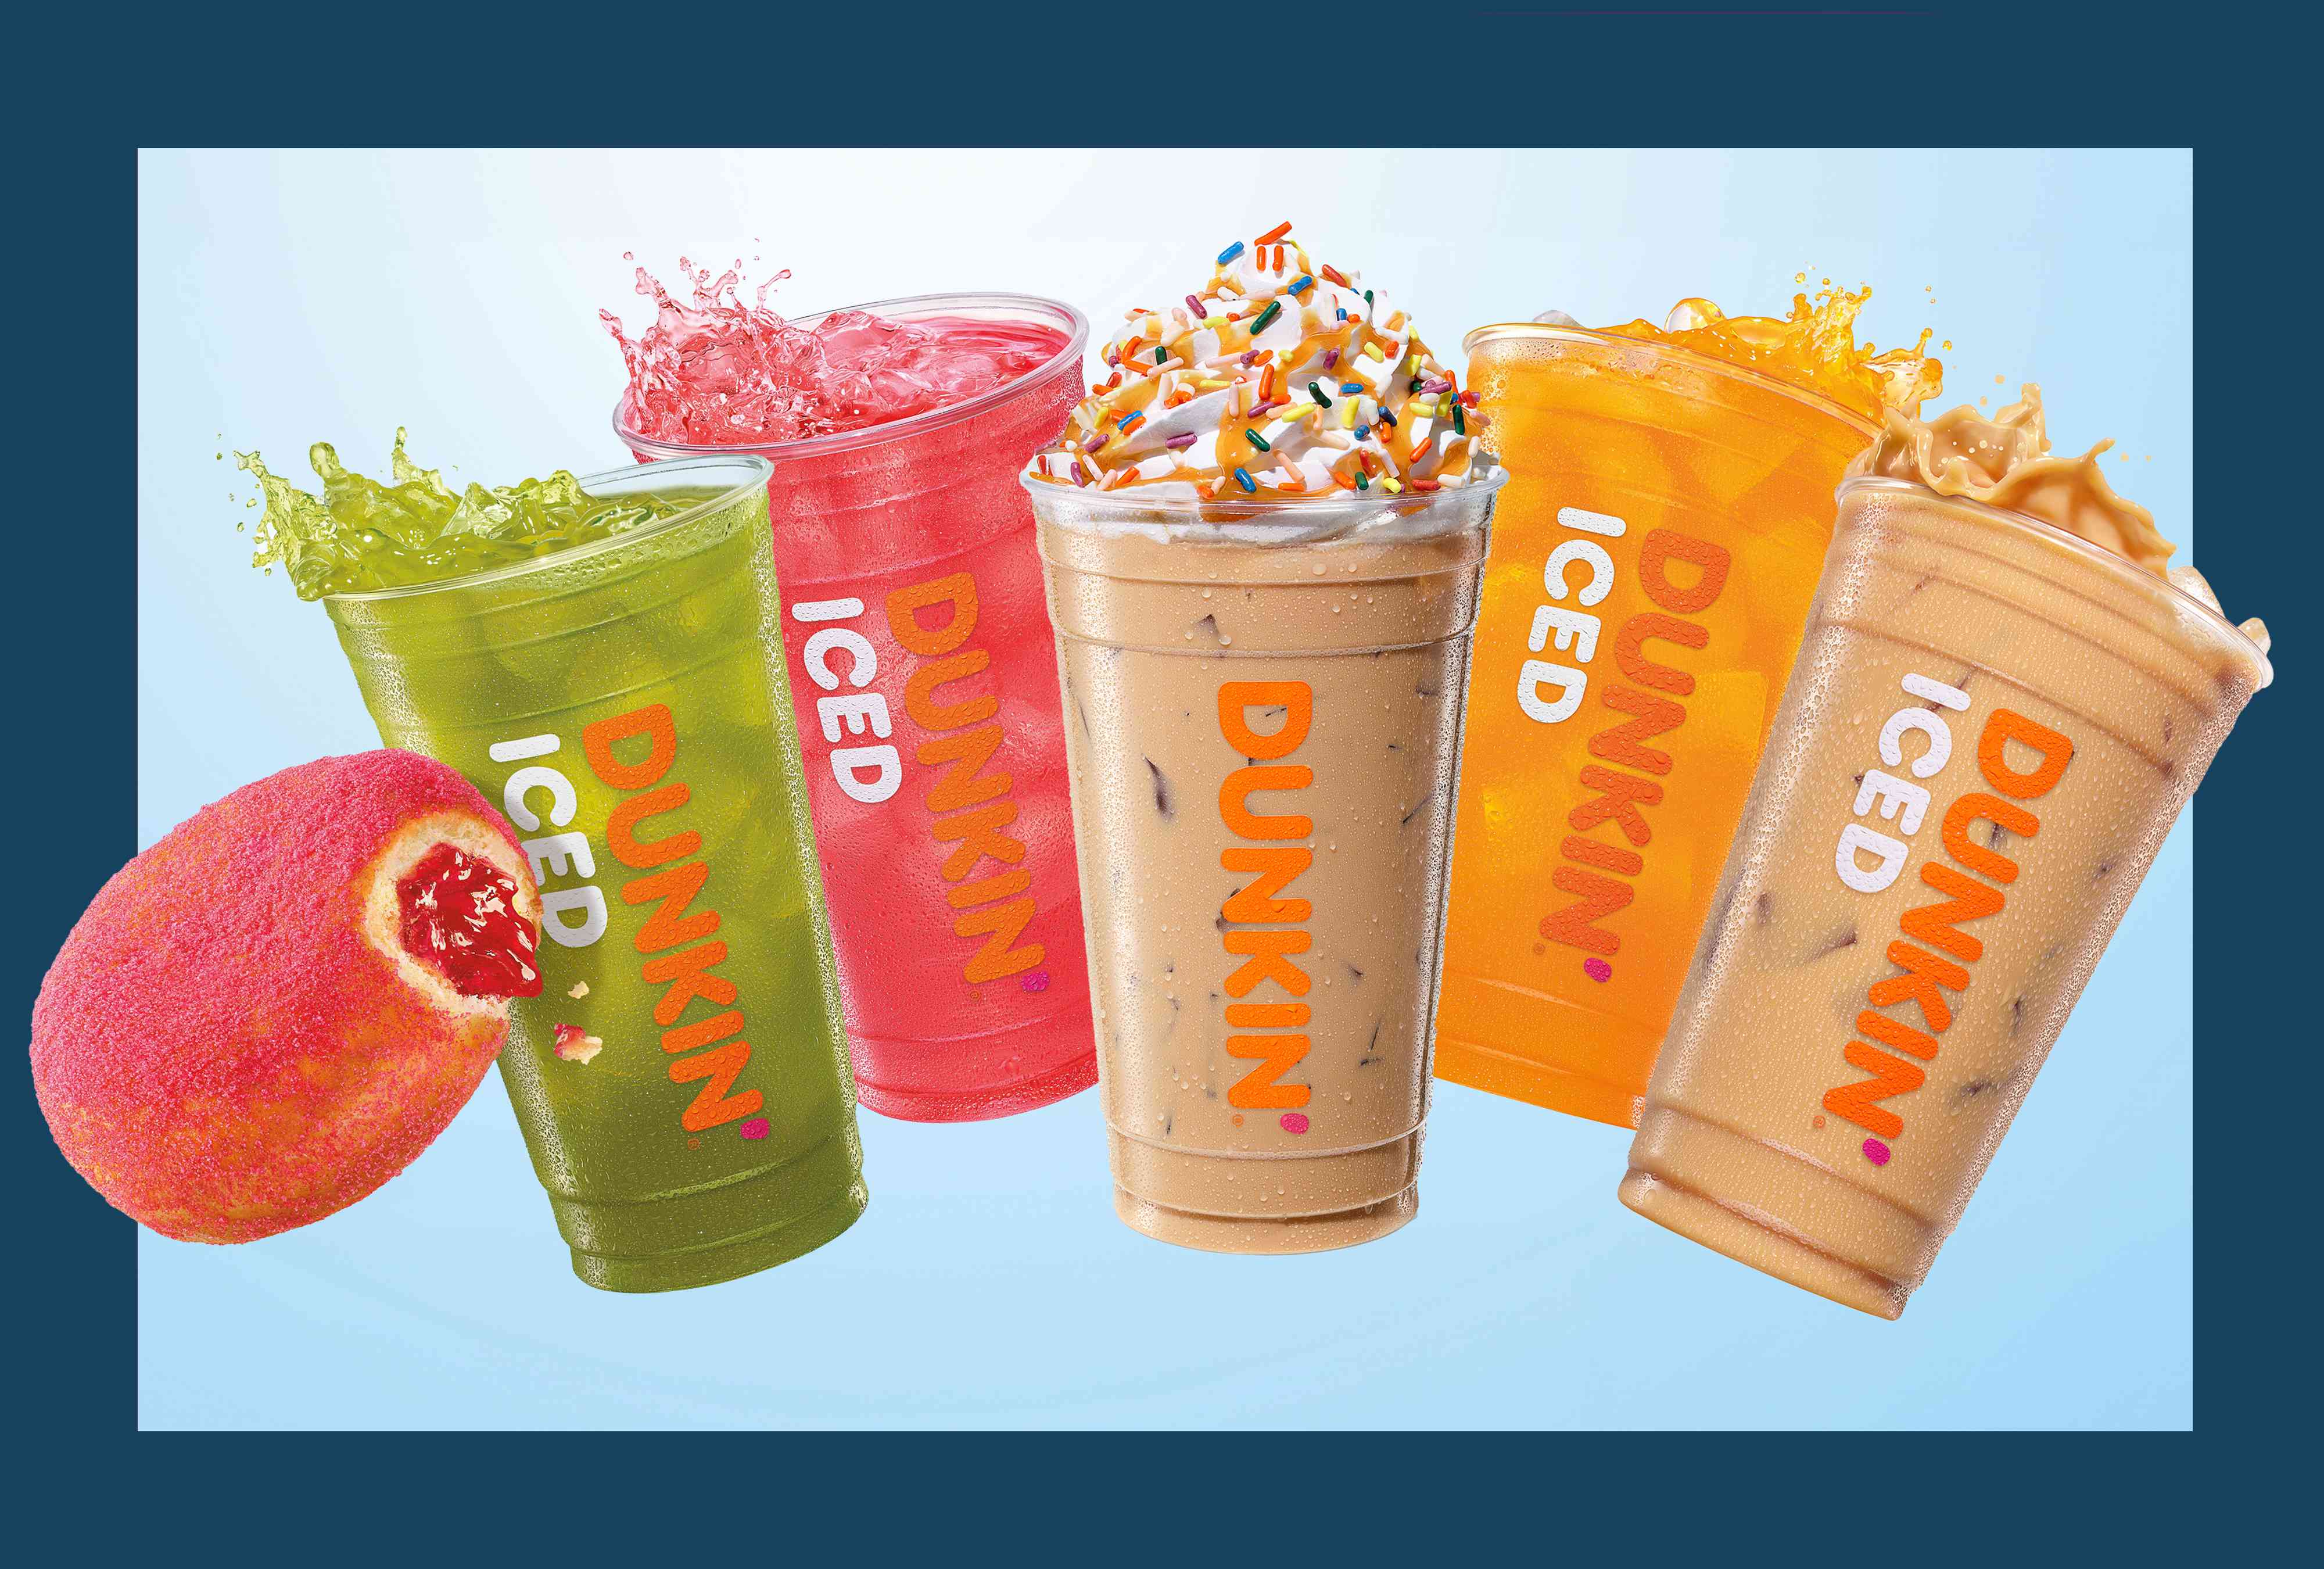 dunkin’s new summer menu includes 2 doughnut-flavored coffees, a new refresher, and a savory wrap